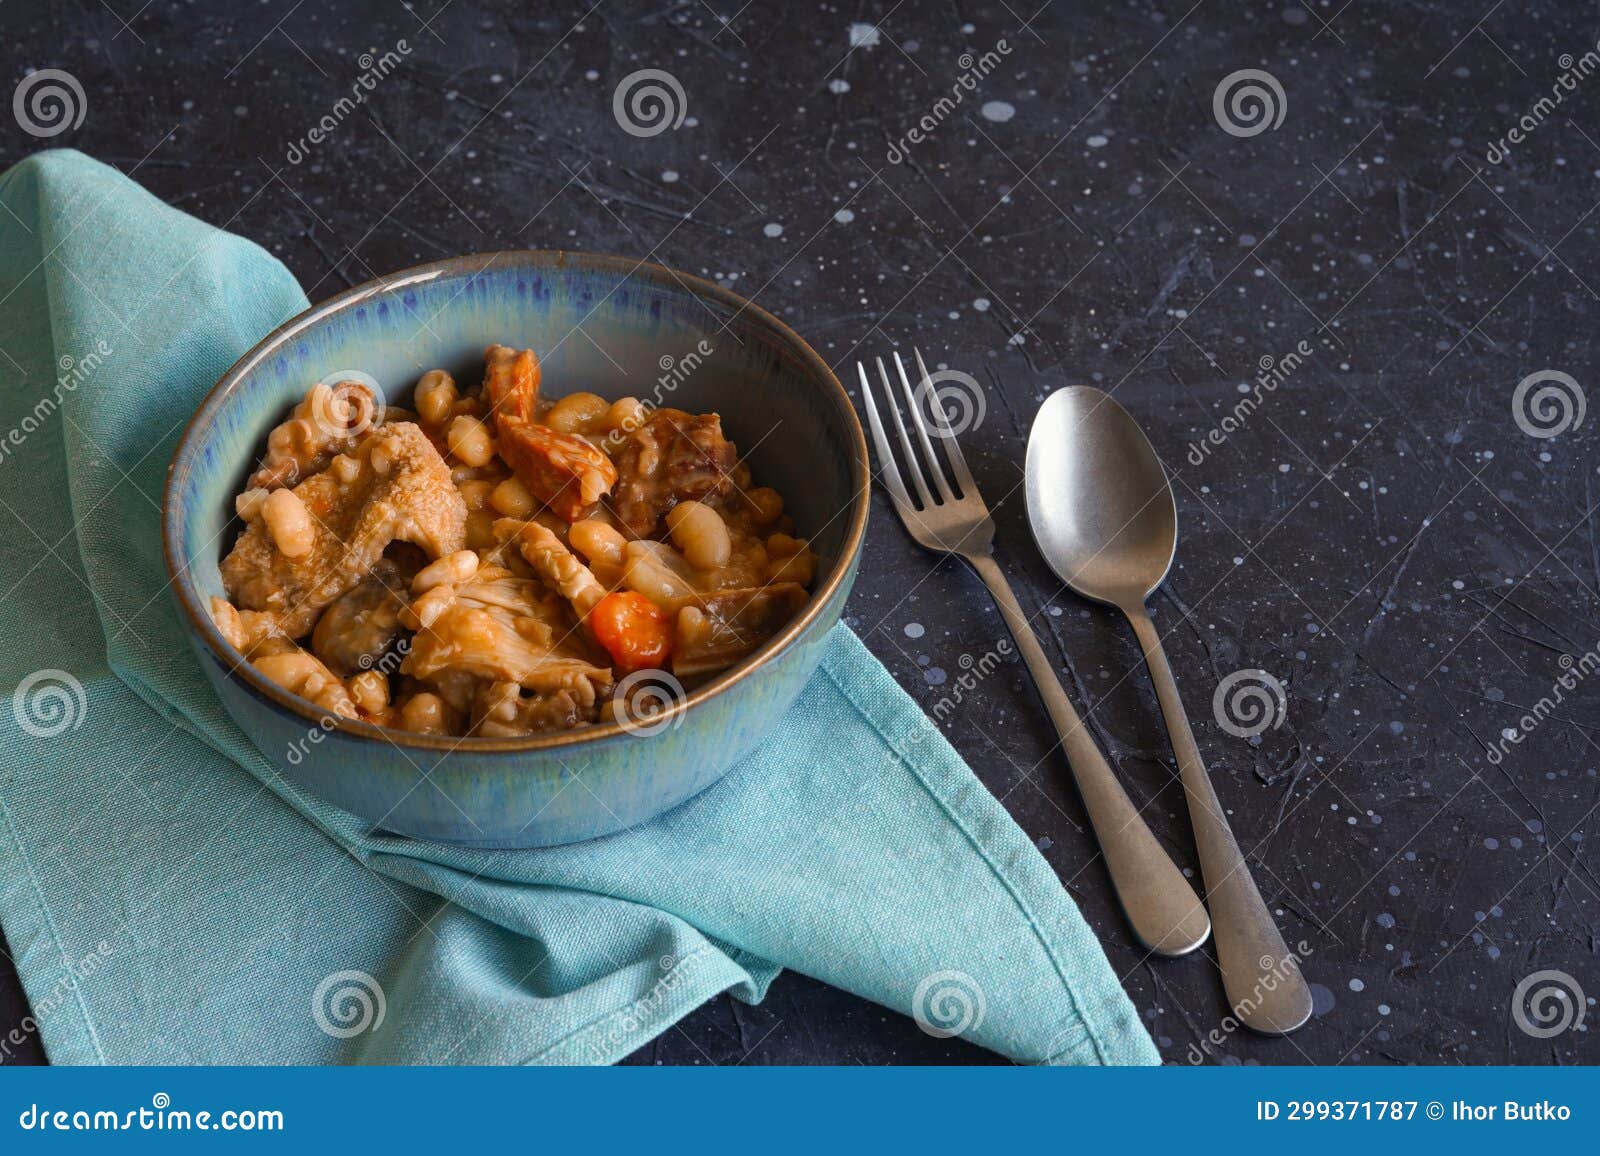 tripas- tripe stew with bread on the black background